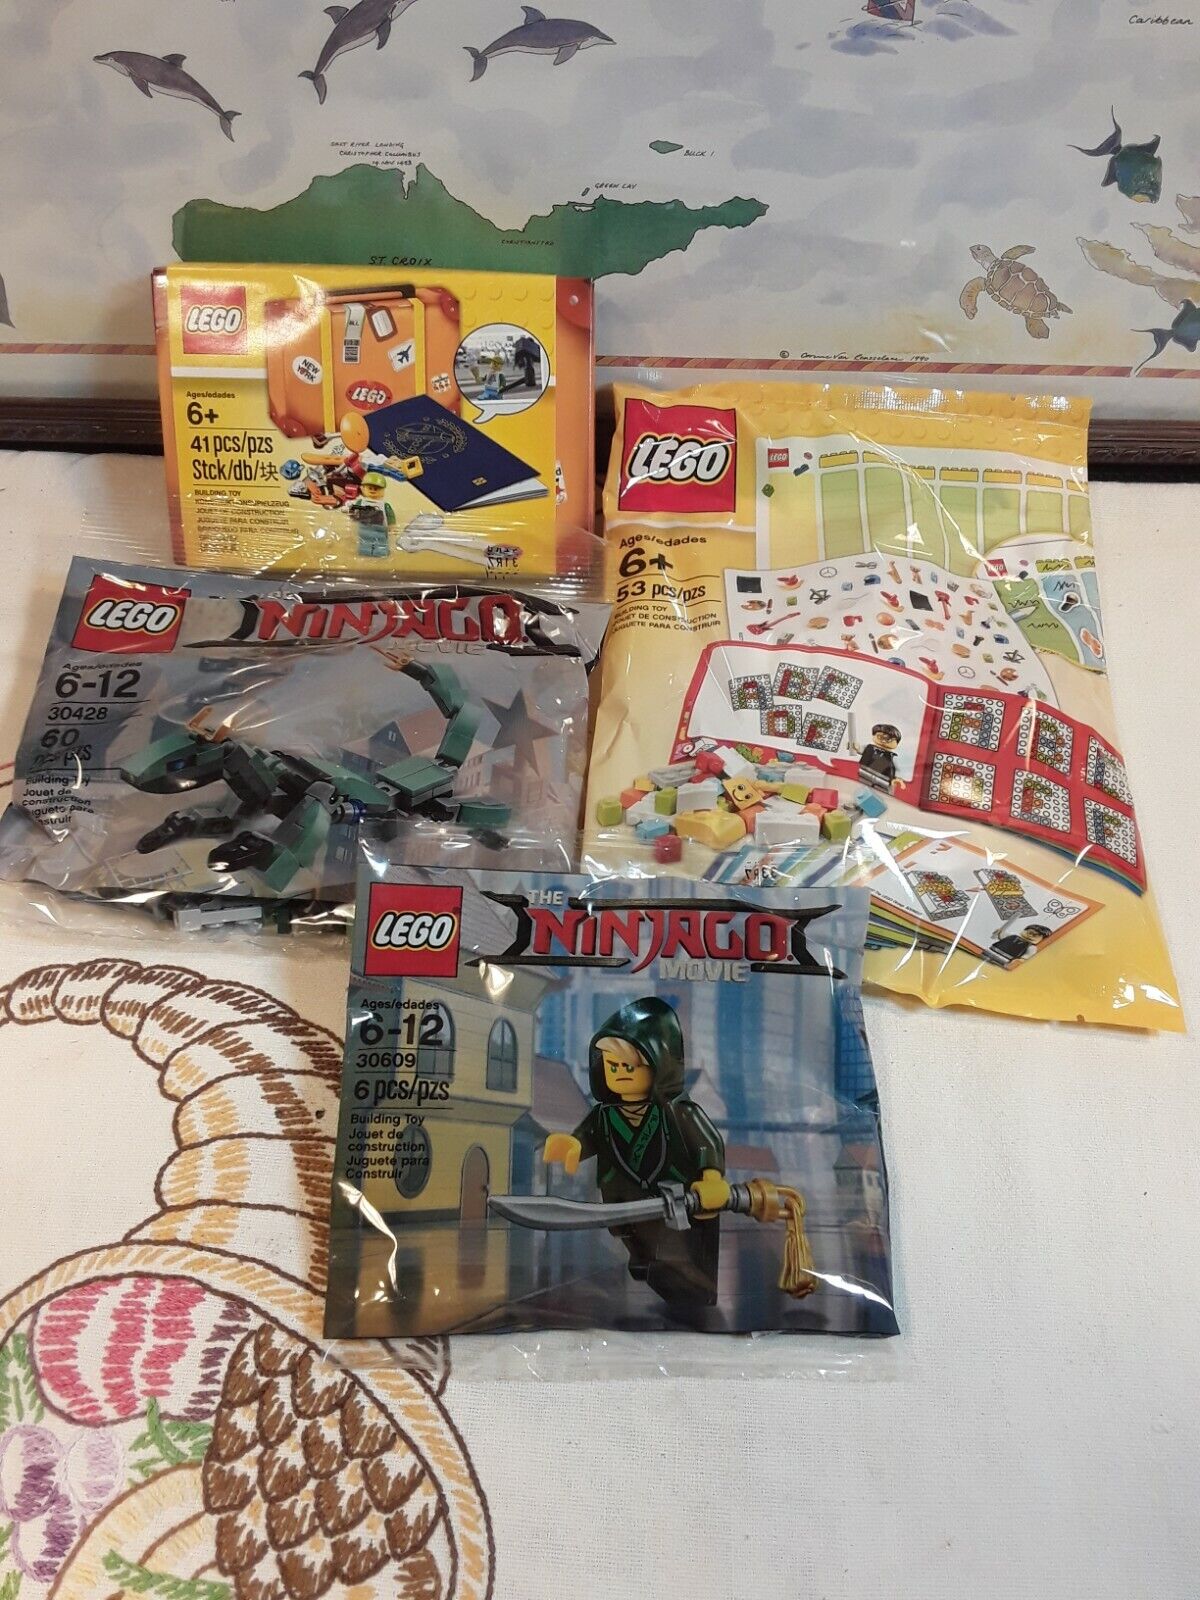 Lot Of 4 New LEGO Packages: 30609, 30428, 5004933, 5004932